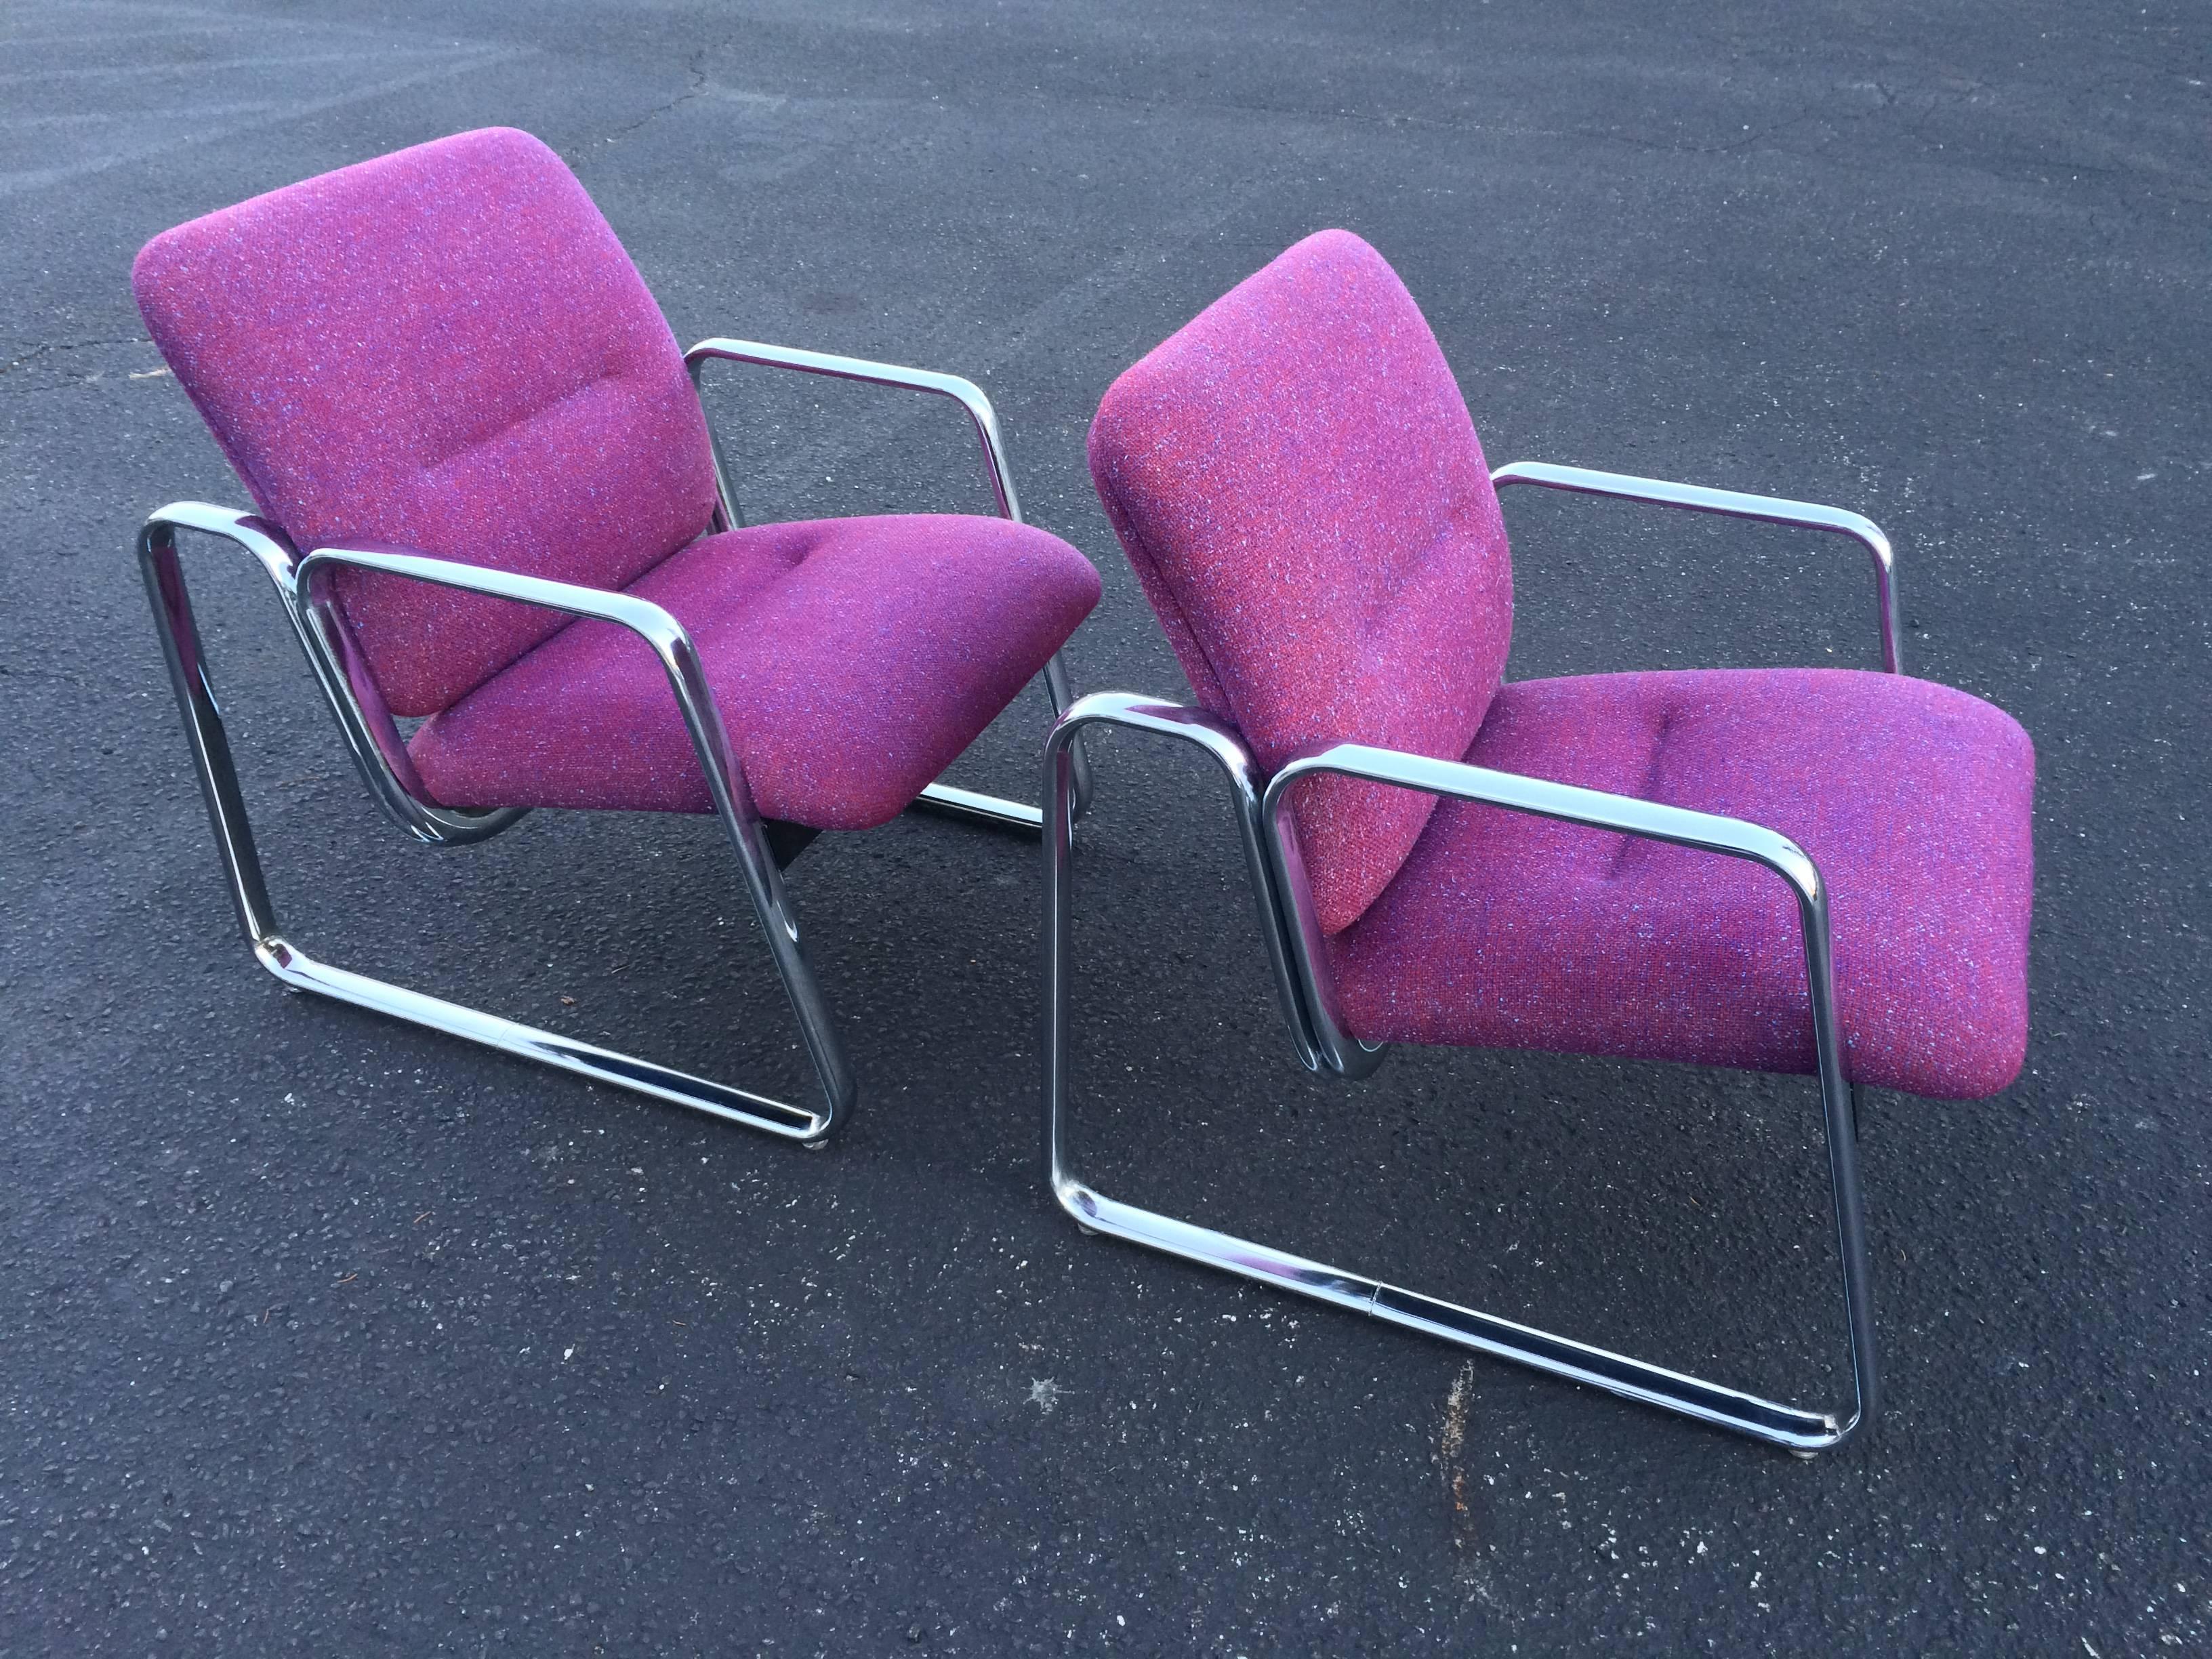 Upholstery Pair of Chrome Steelcase Chairs in Violet For Sale